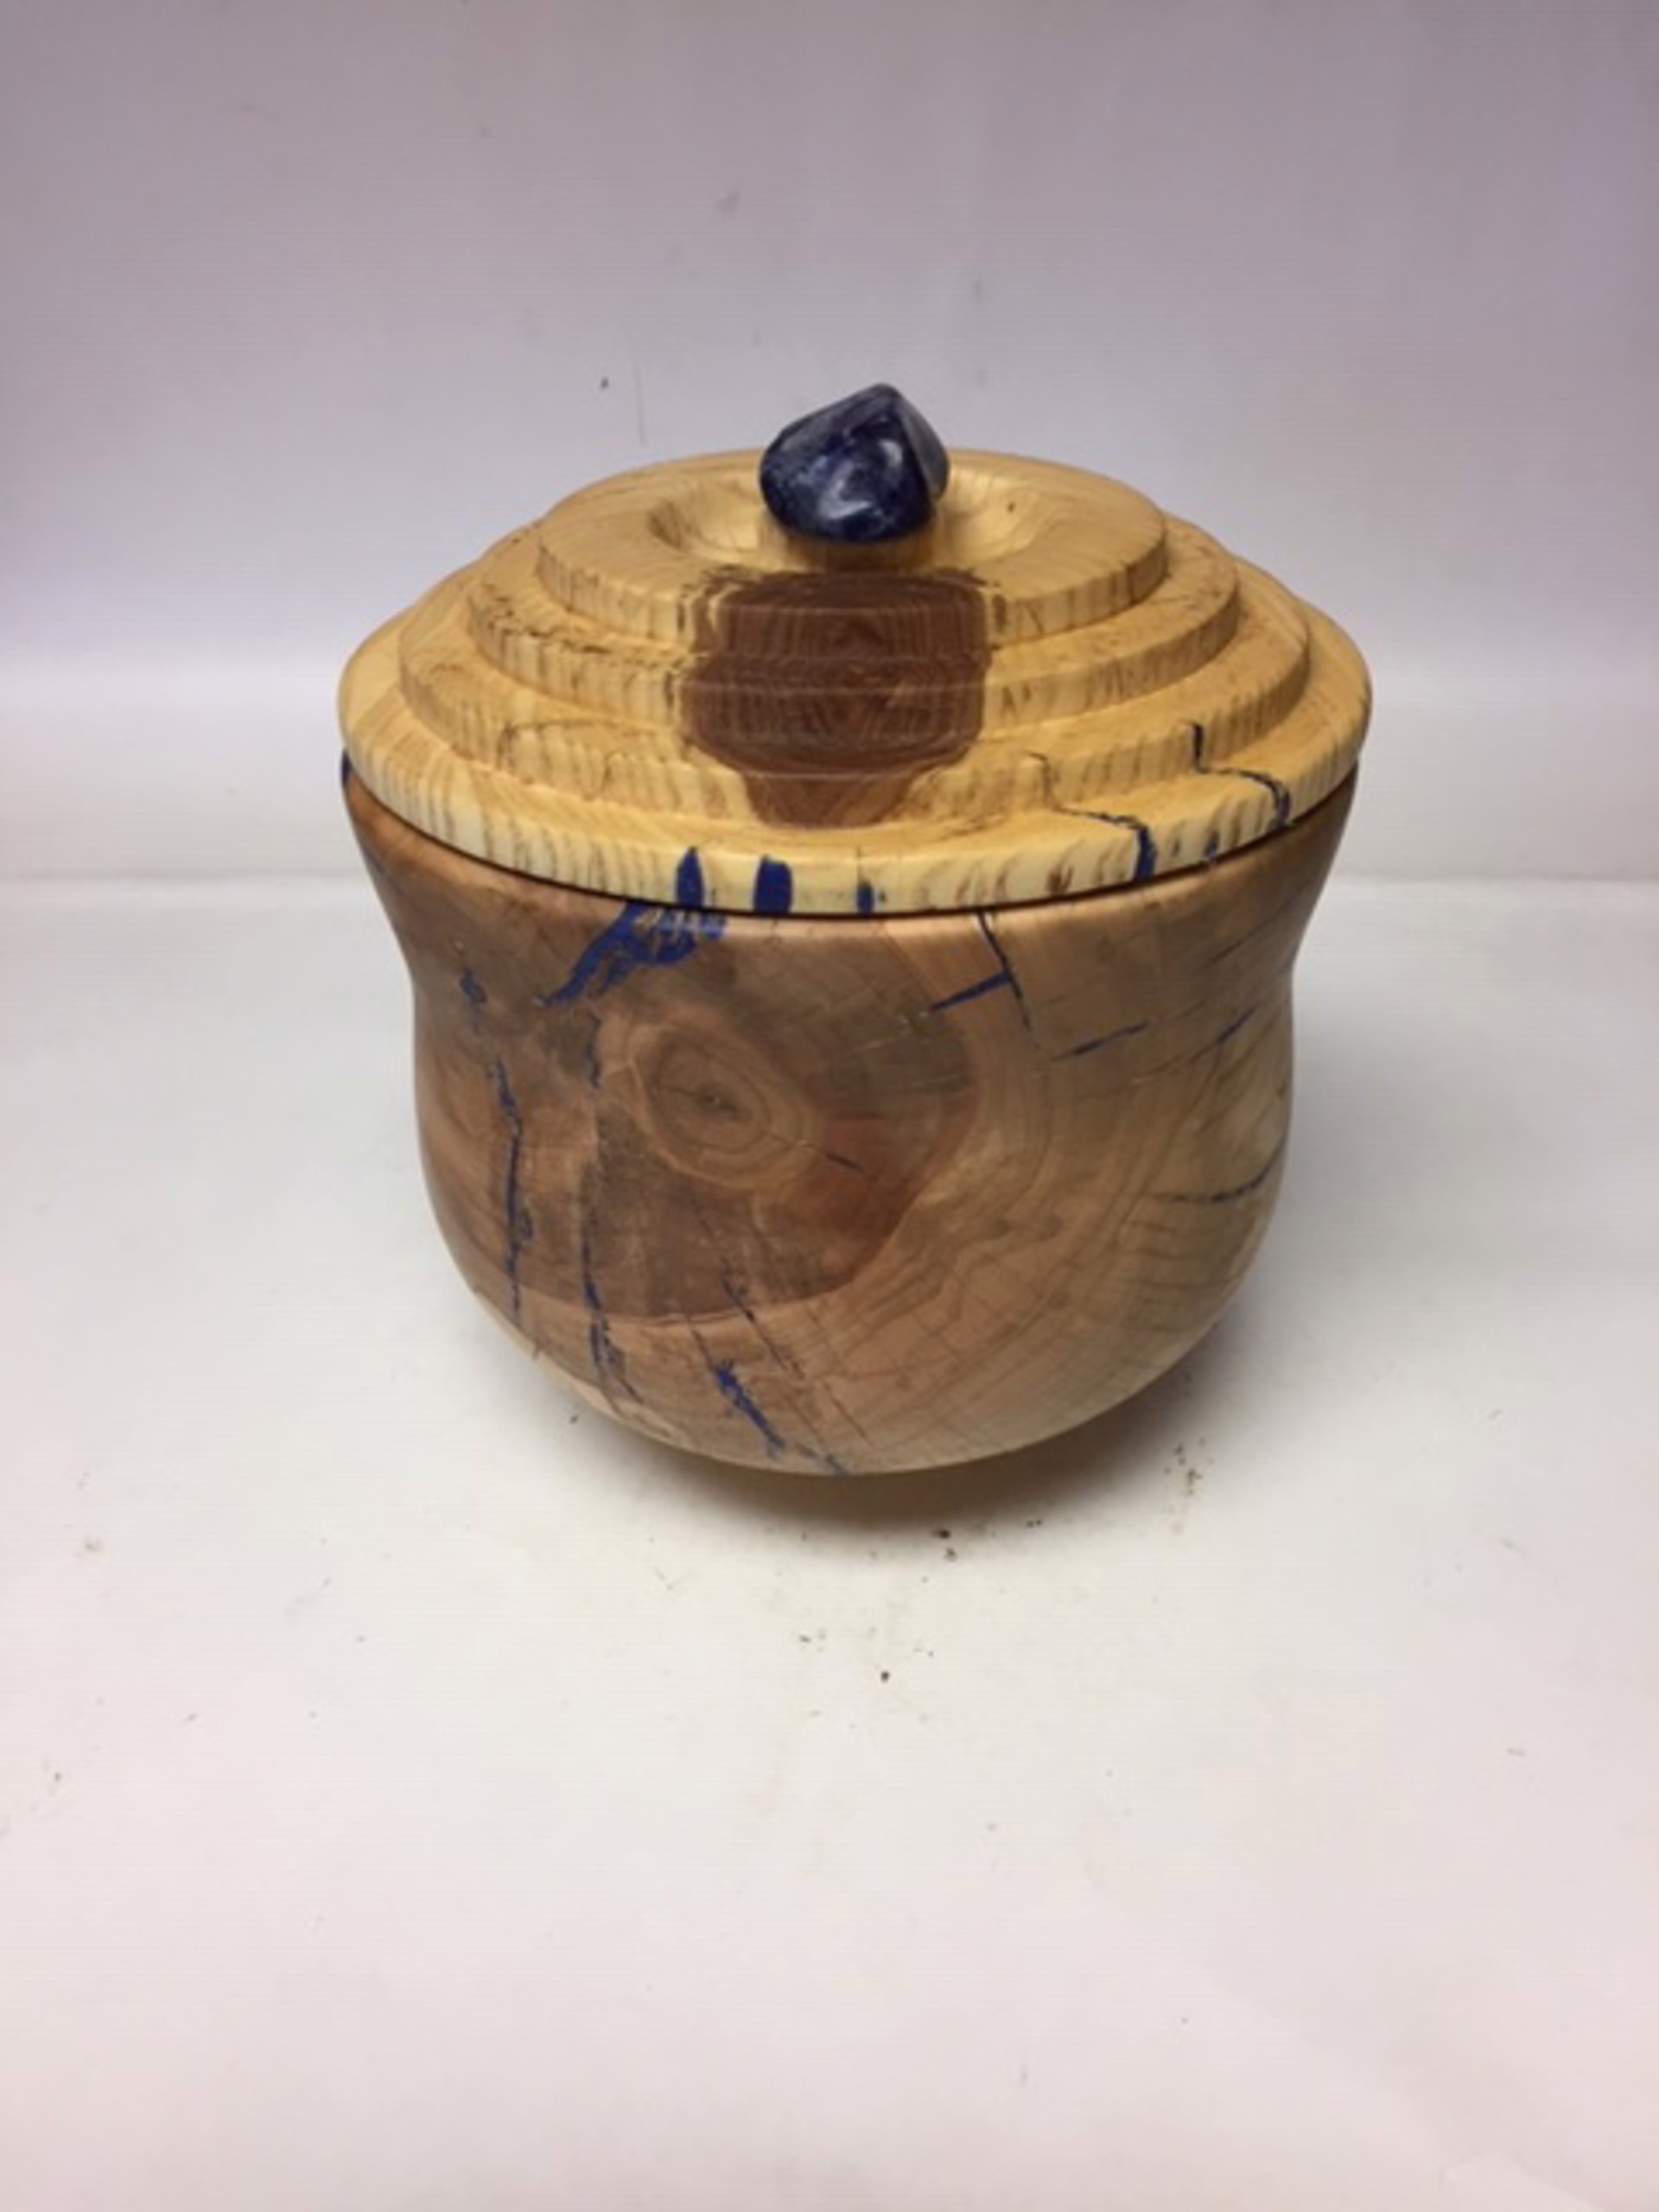 Turned Wood Jar W/Lid #20-21 by Rick Squires